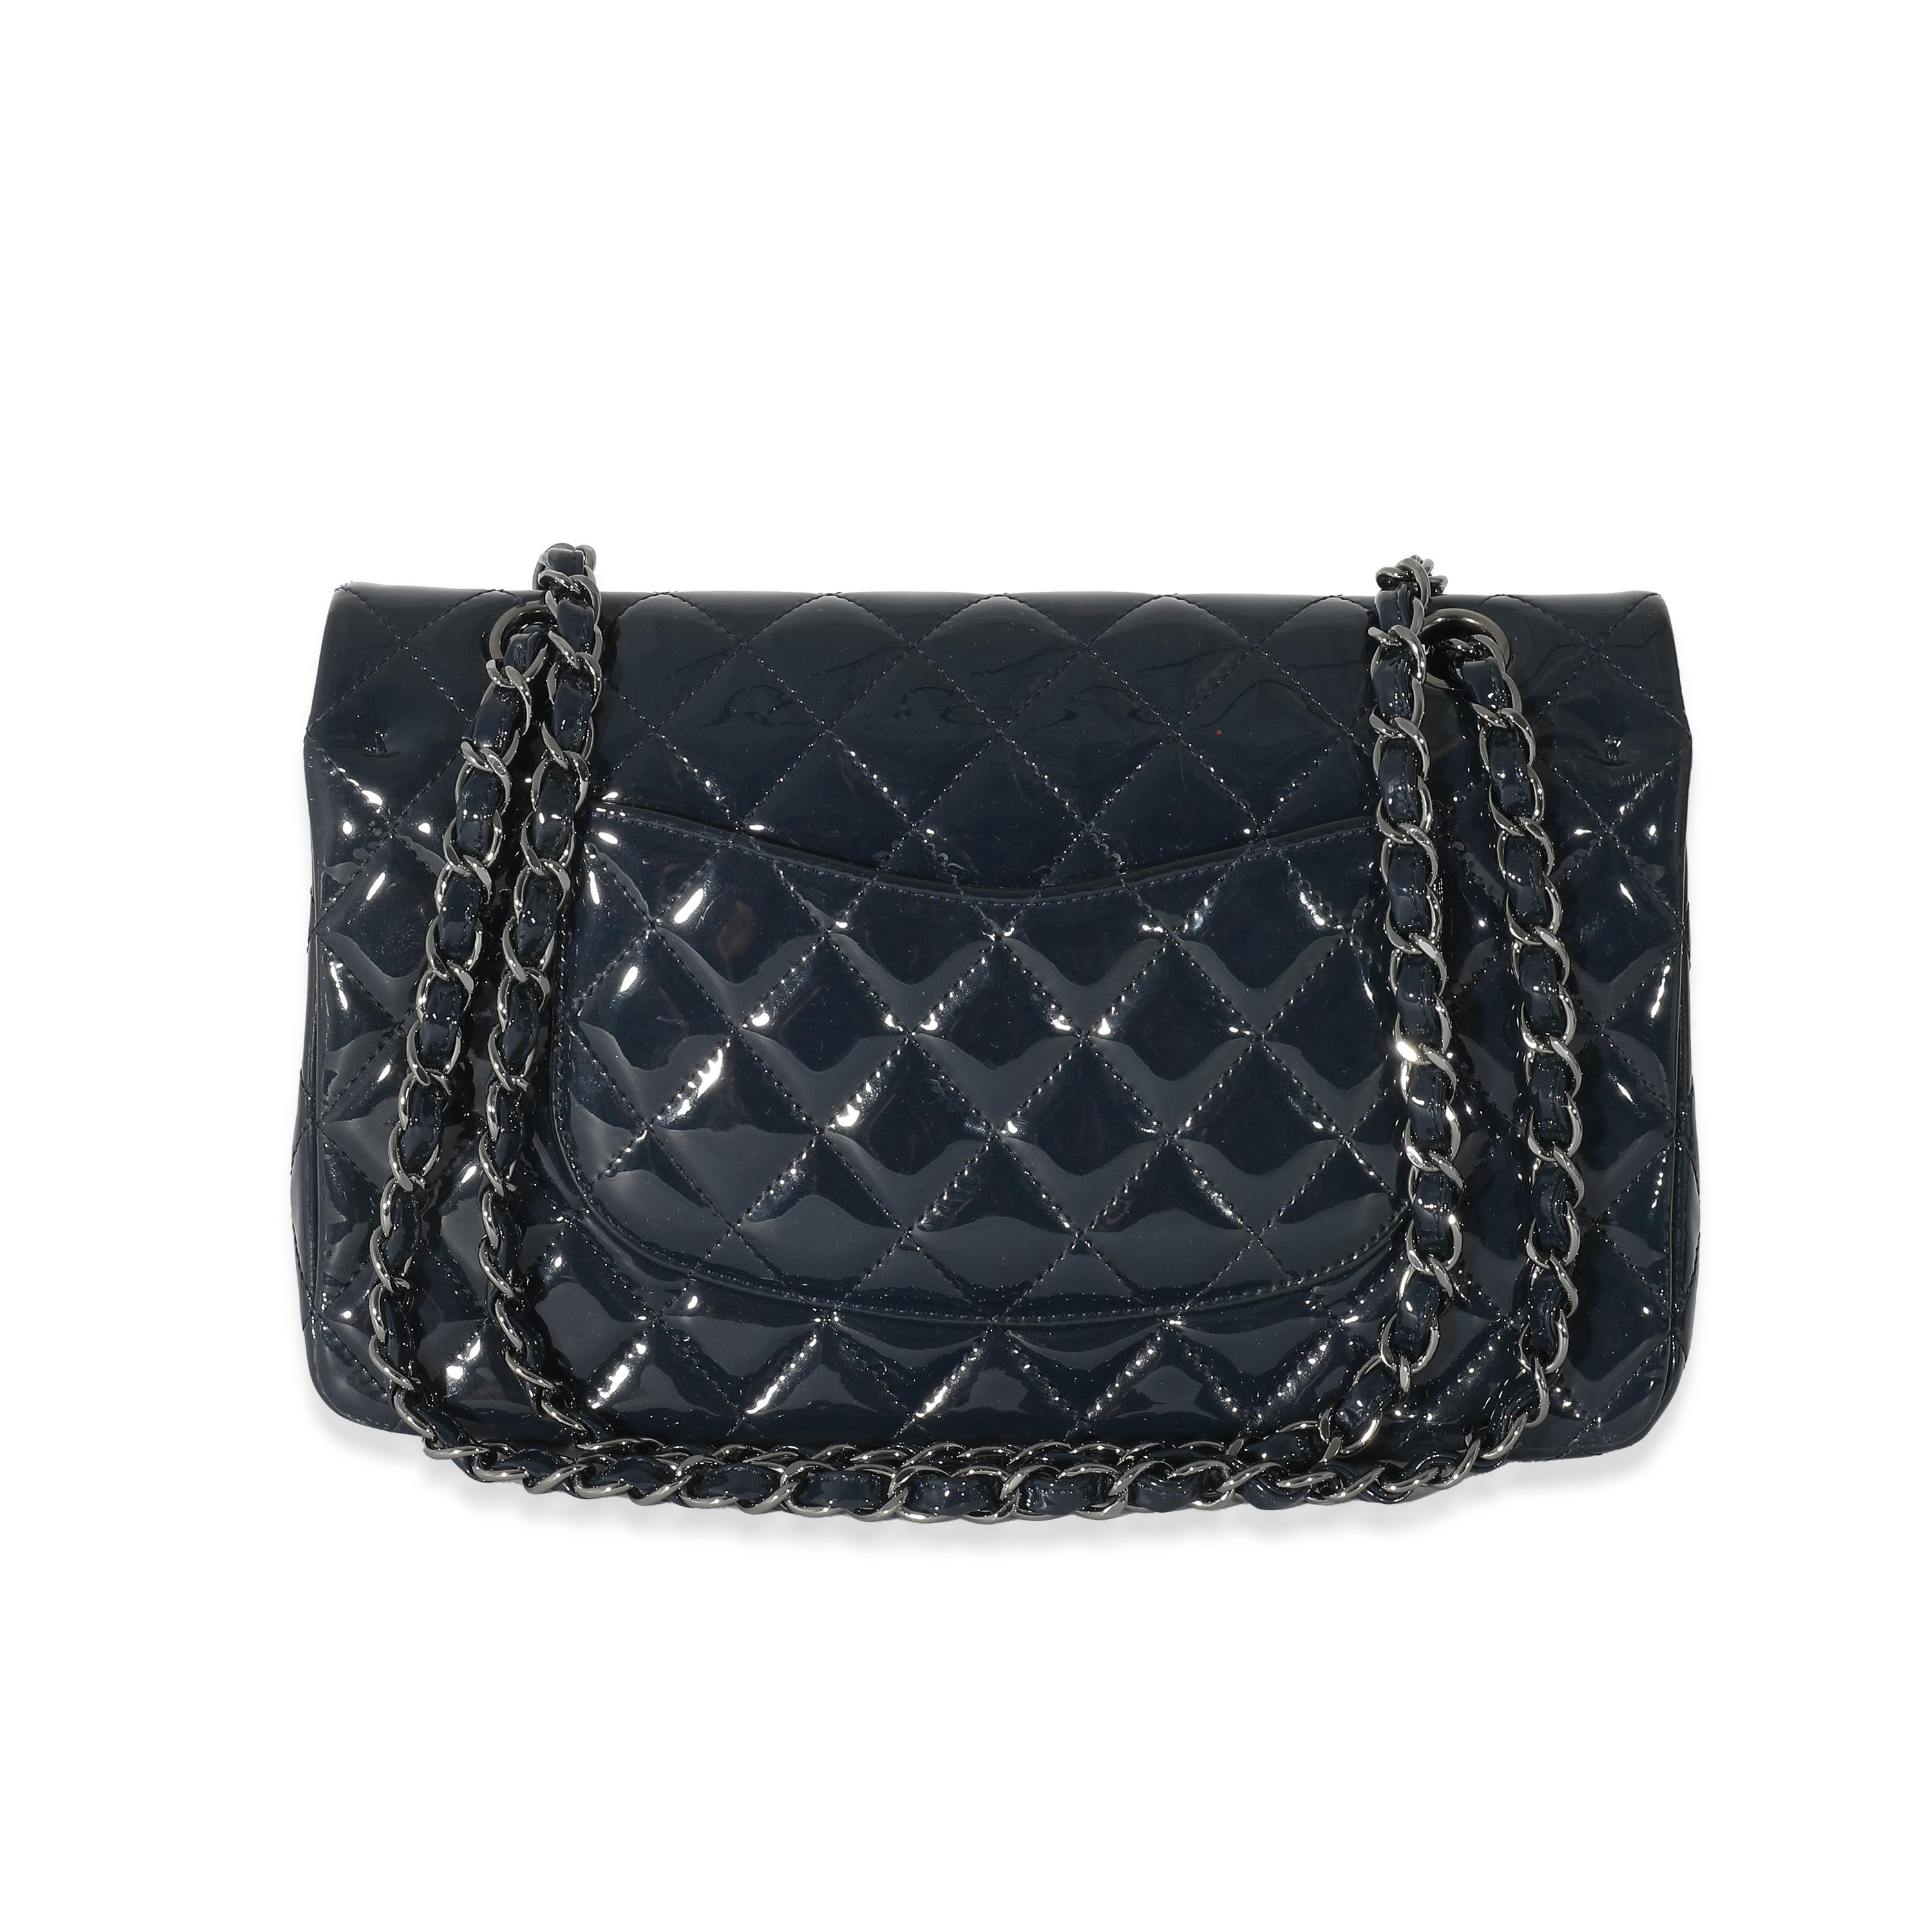 Listing Title: Chanel Navy Quilted Patent Medium Classic Double Flap Bag
SKU: 134212
Condition: Pre-owned 
Condition Description: A timeless classic that never goes out of style, the flap bag from Chanel dates back to 1955 and has seen a number of